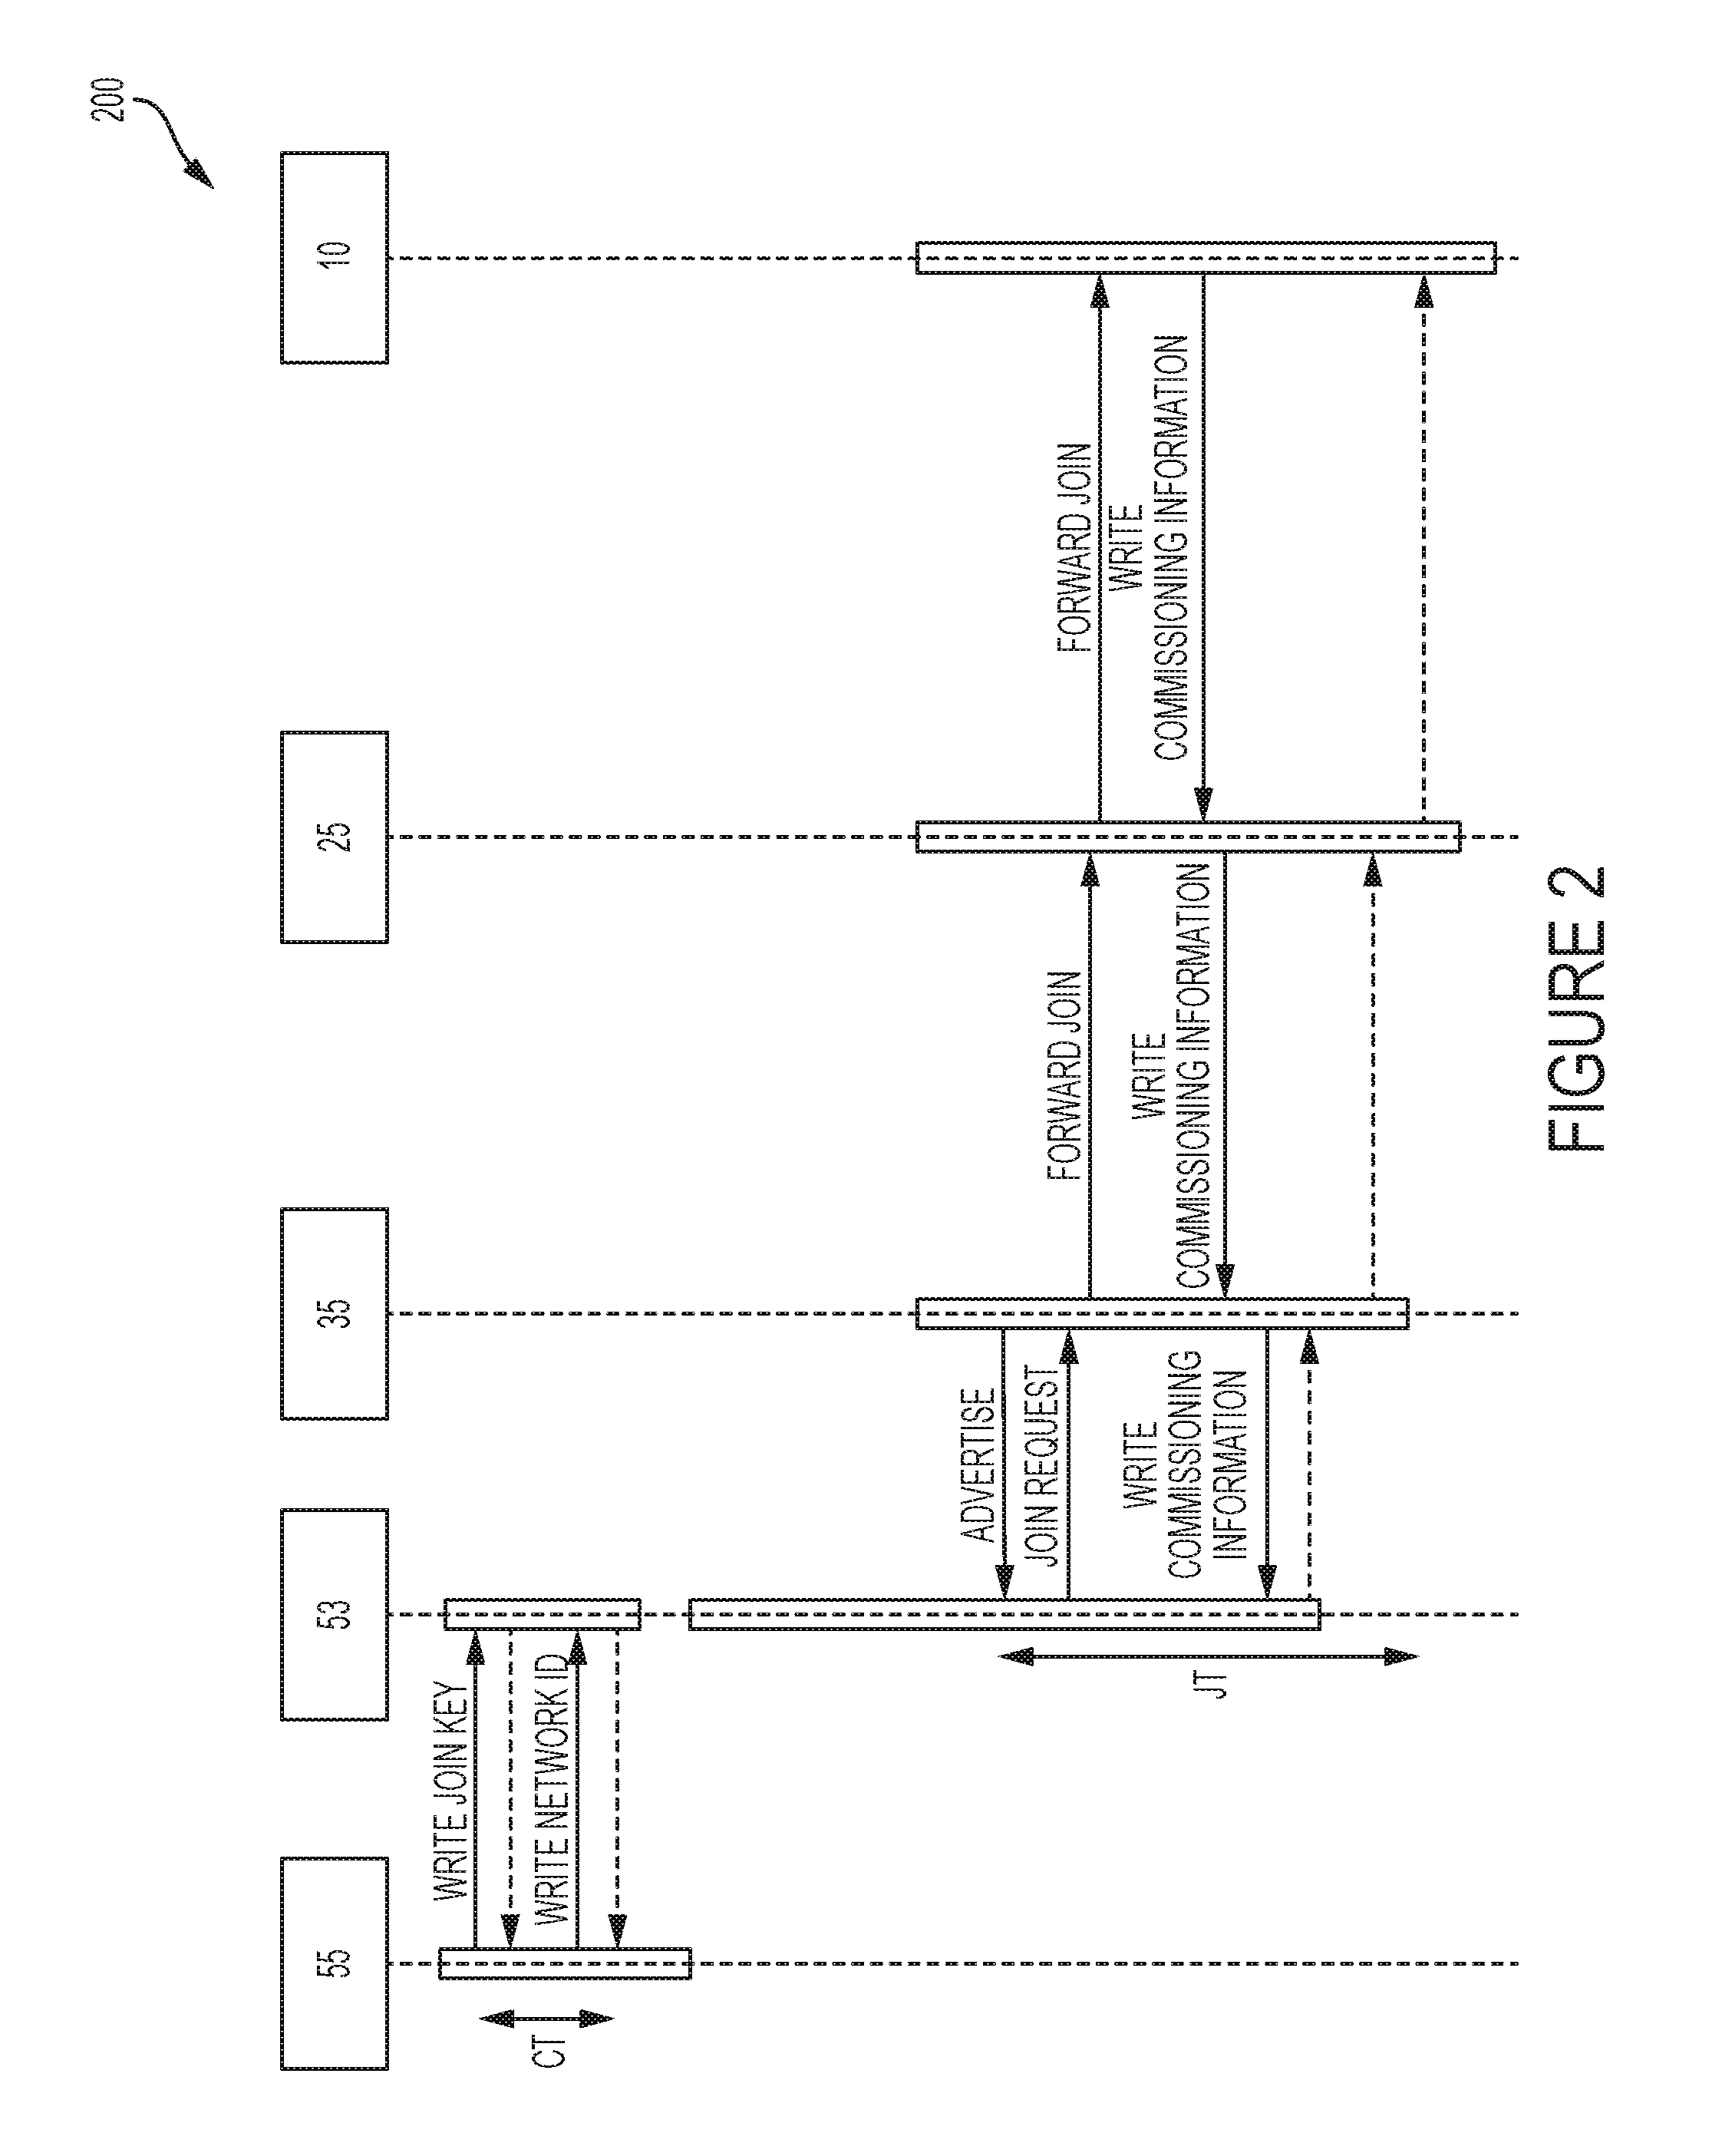 Method for commissioning and joining of a field device to a network